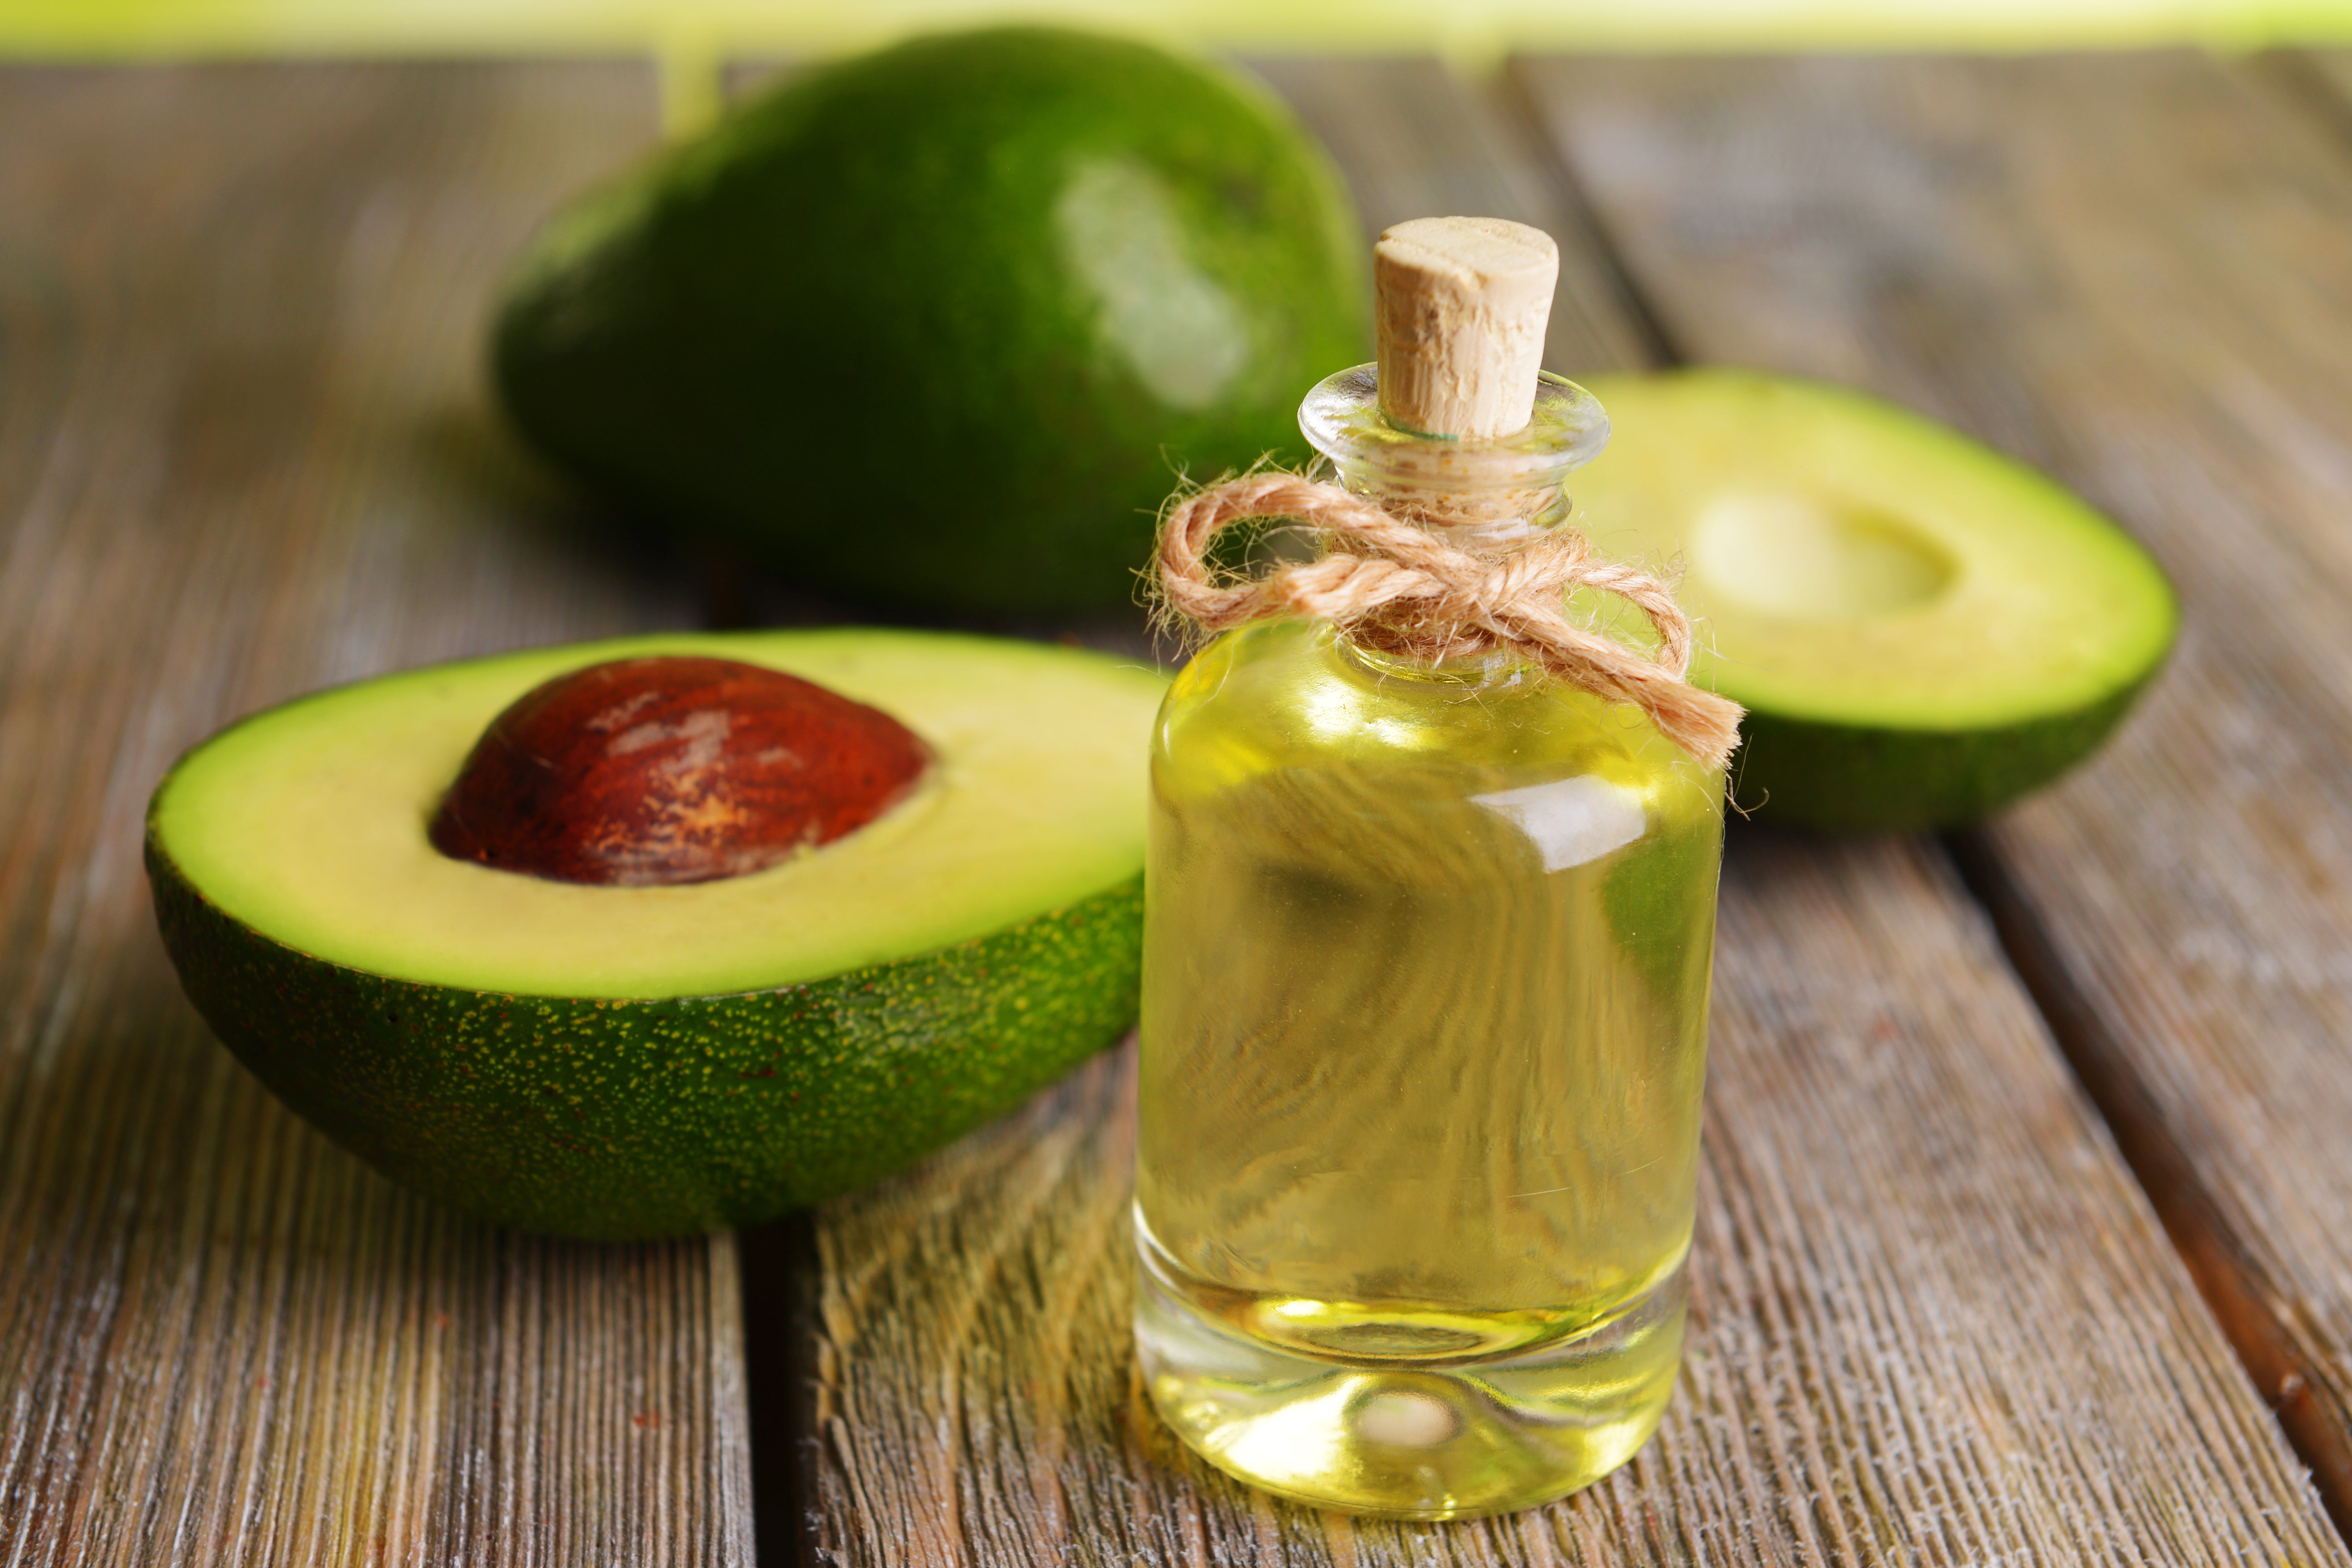 Best Oils for Beards: What are the Benefits of Using Avocado Oil for Beard Care?